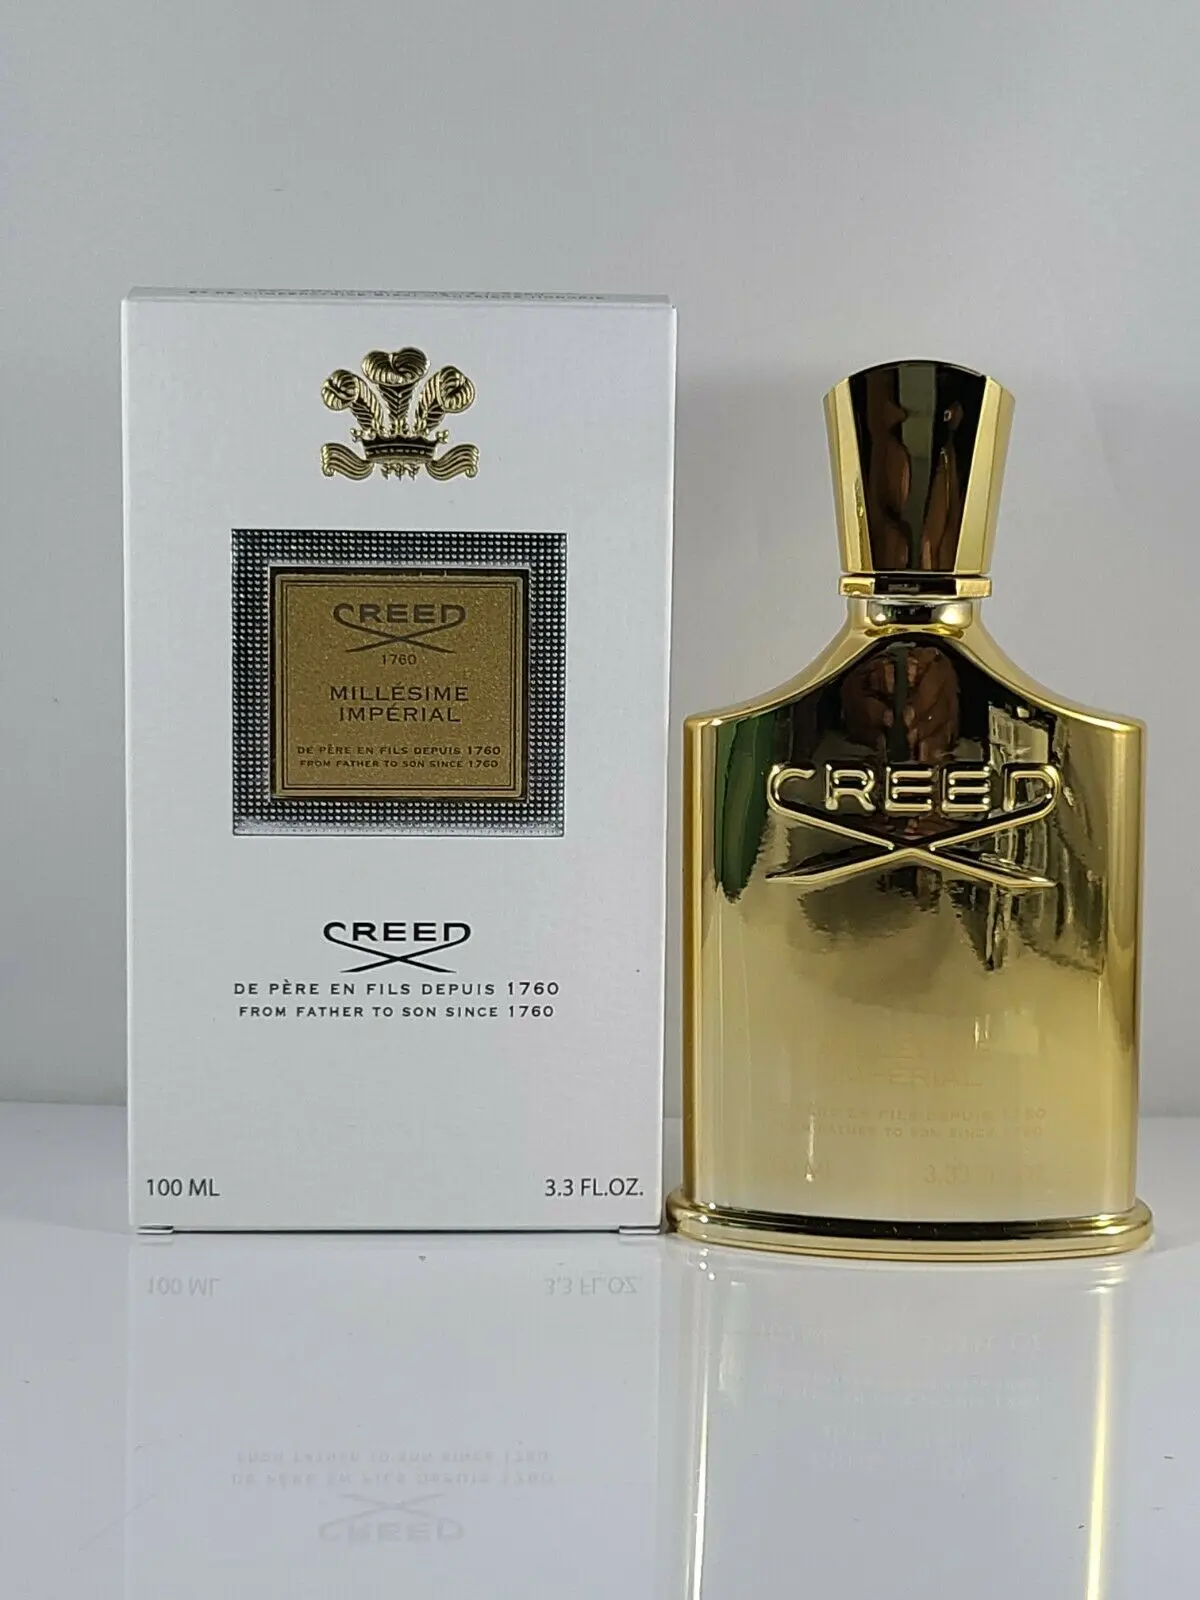 

Perfumes Creed Millesime Imperial Gold Creed Woody Floral Body Spray Perfumes Parfum Original Cologne